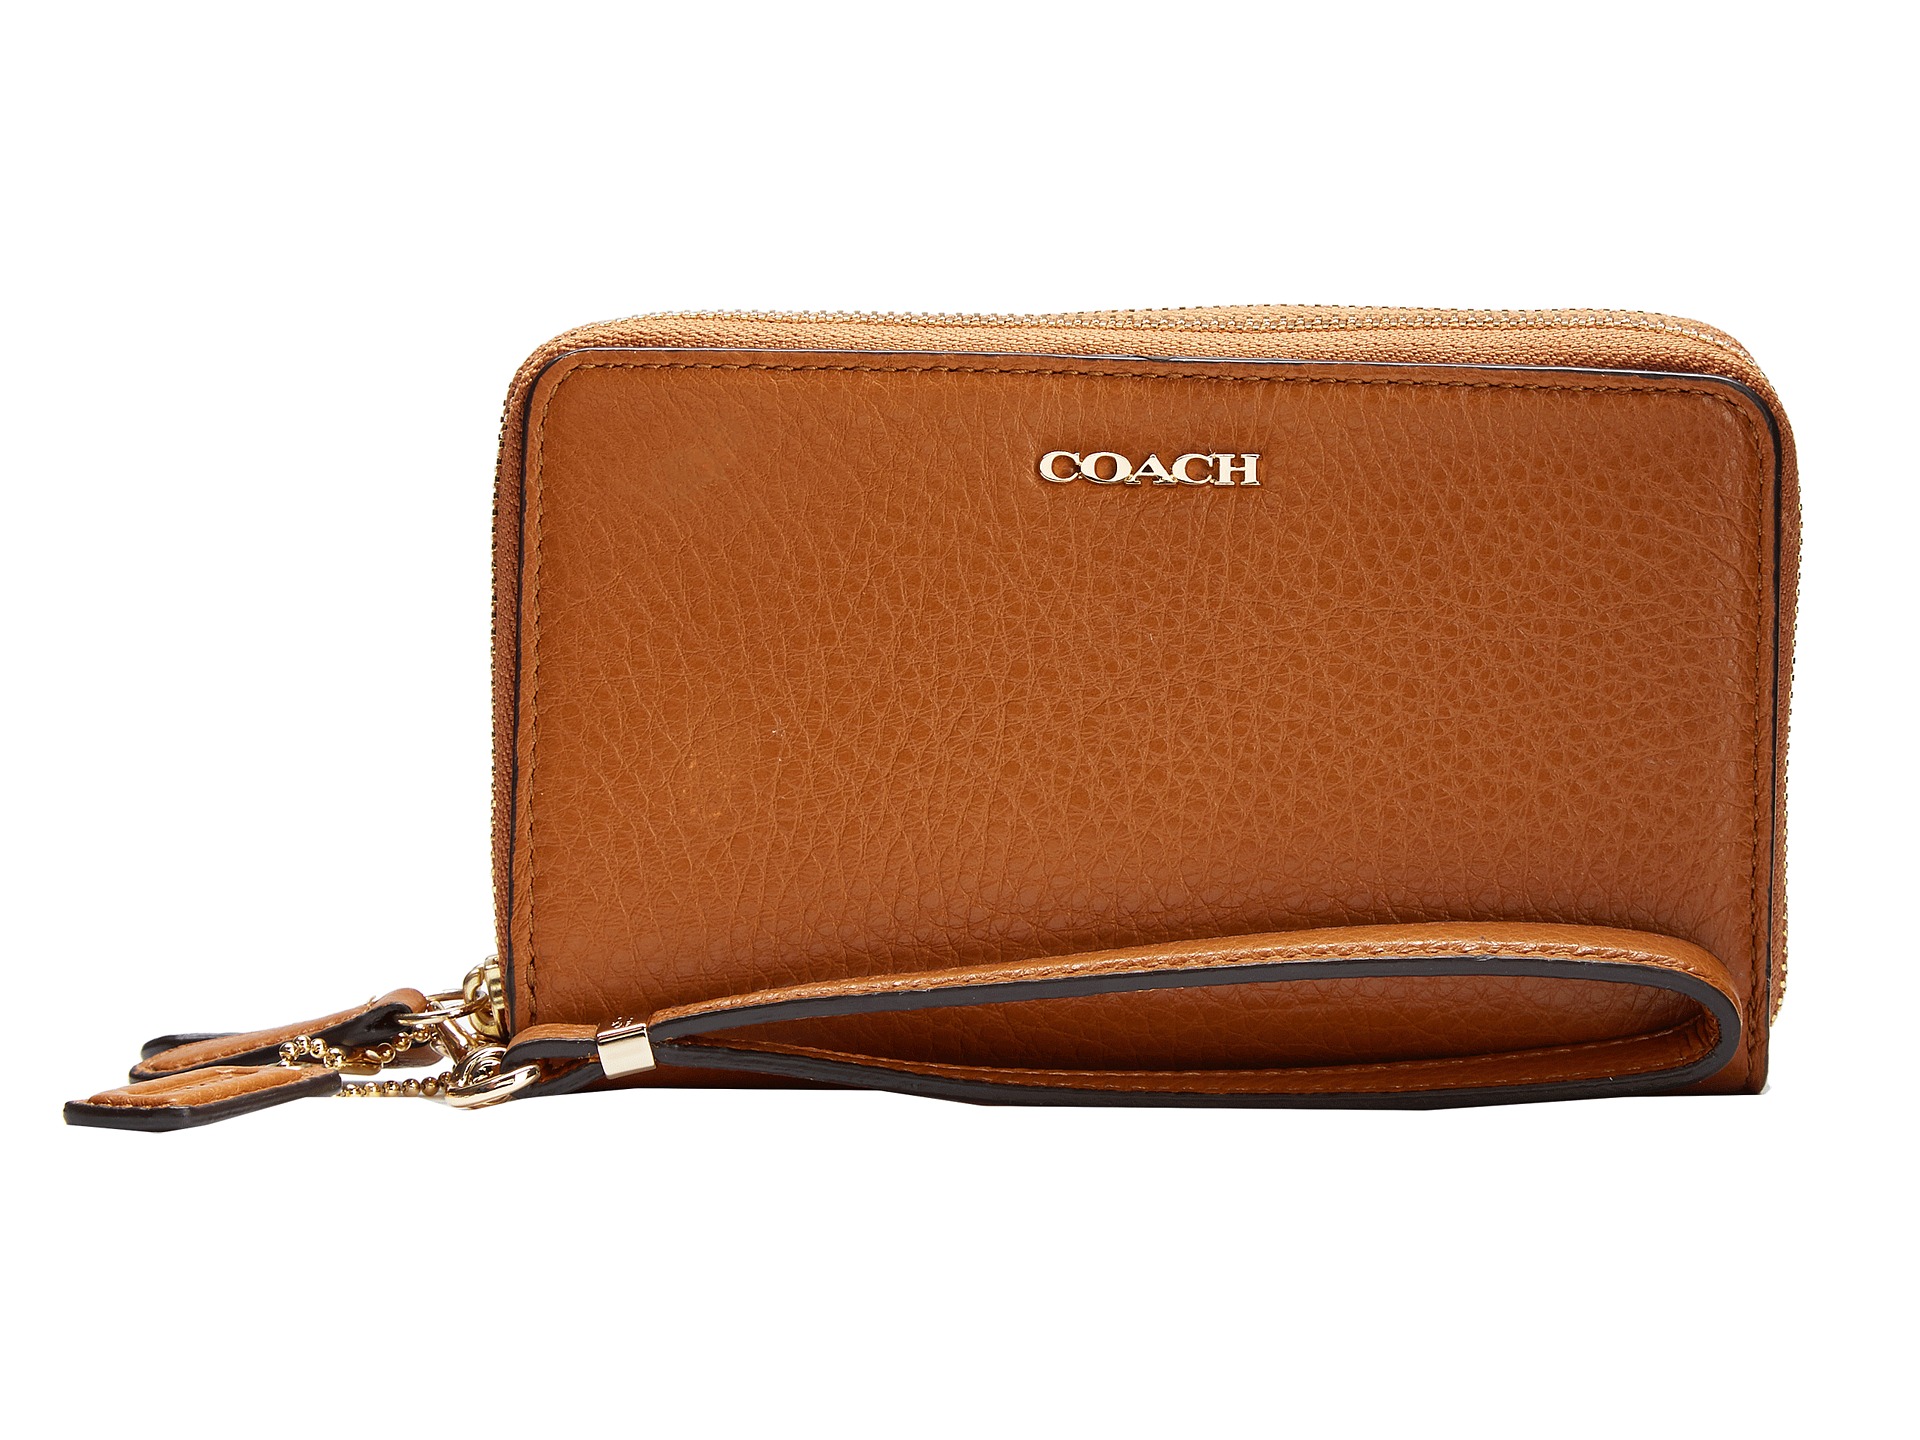 Coach Madison Leather Double Zip Phone Wallet | Shipped Free at Zappos